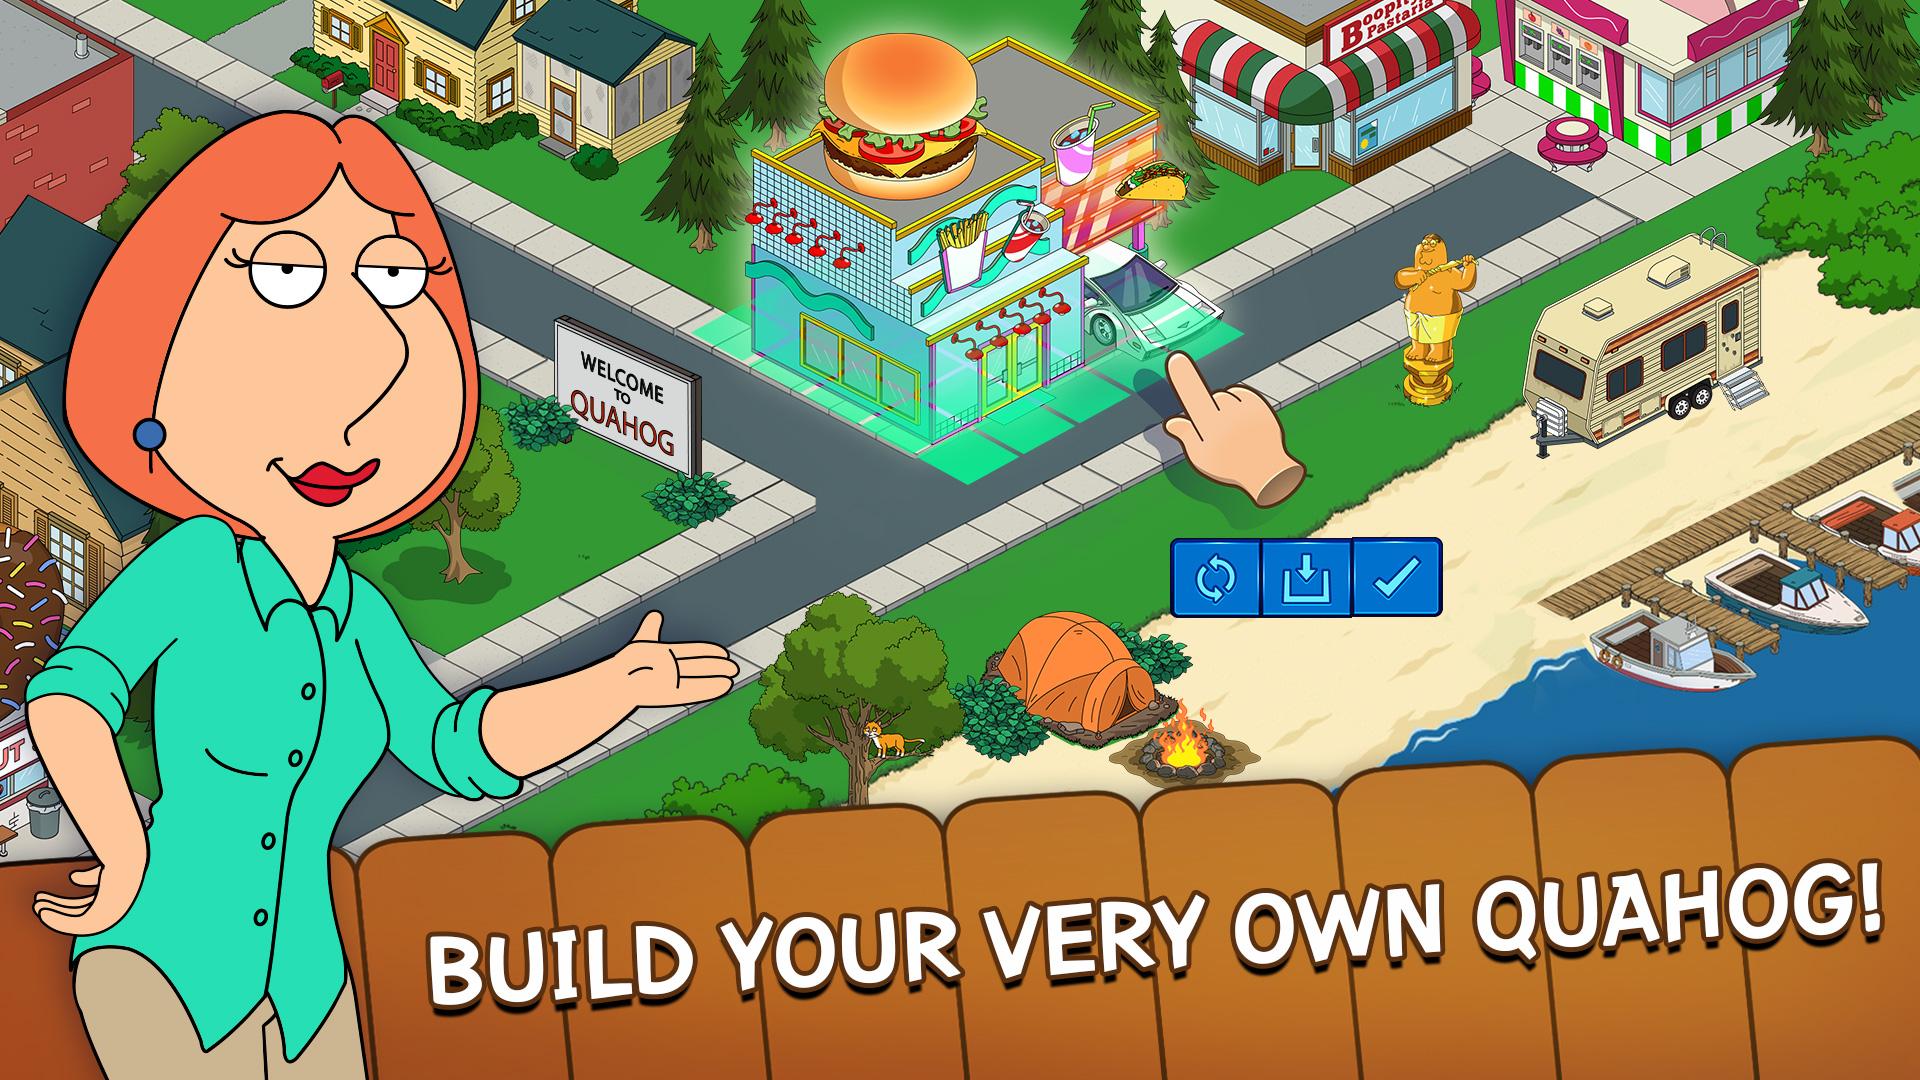 Android application Family Guy The Quest for Stuff screenshort